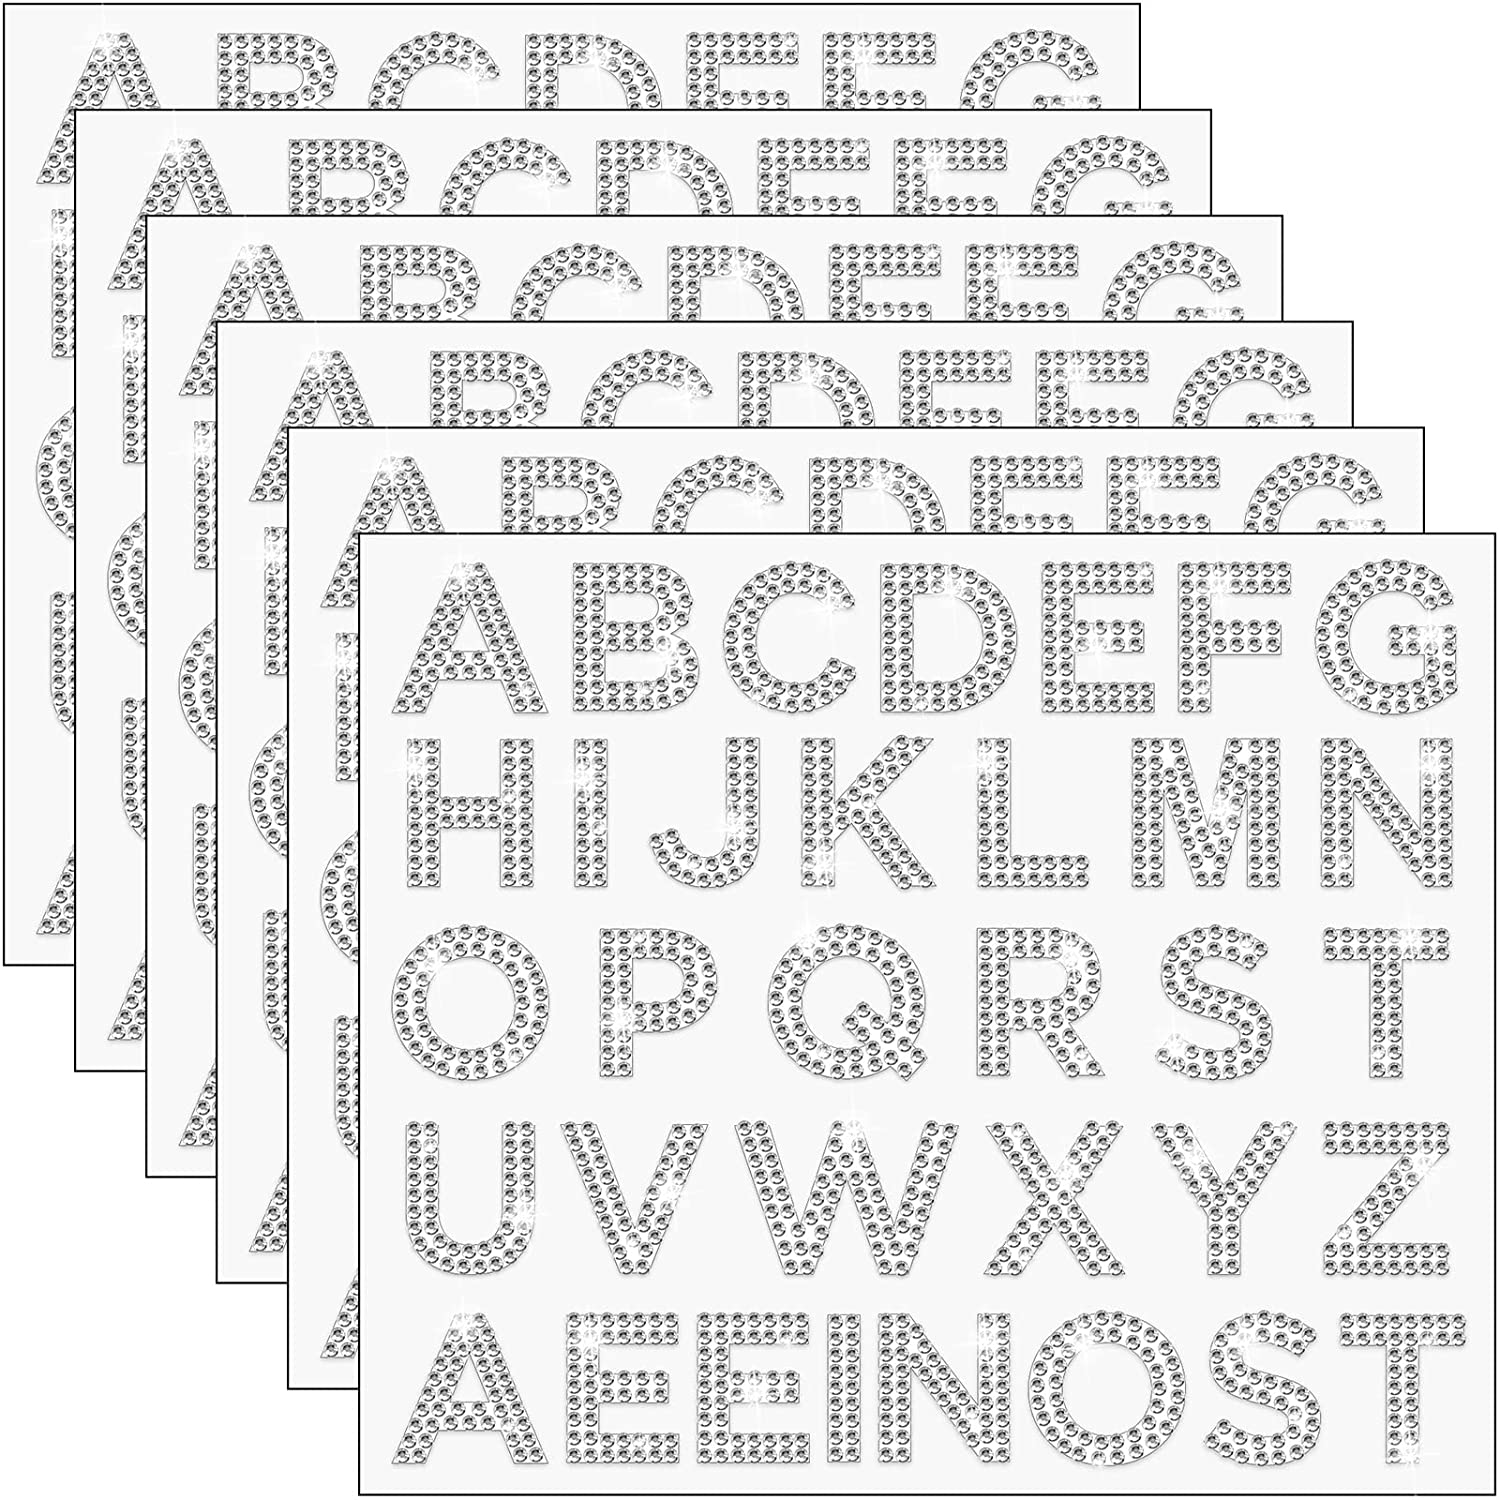 Rhinestone Letter Stickers Glitter Stickers Rhinestone Alphabet Letter Stickers 34 Letters Self-Adhesive Stickers Sheets For Craft Clothing DIY Decor (Silver)